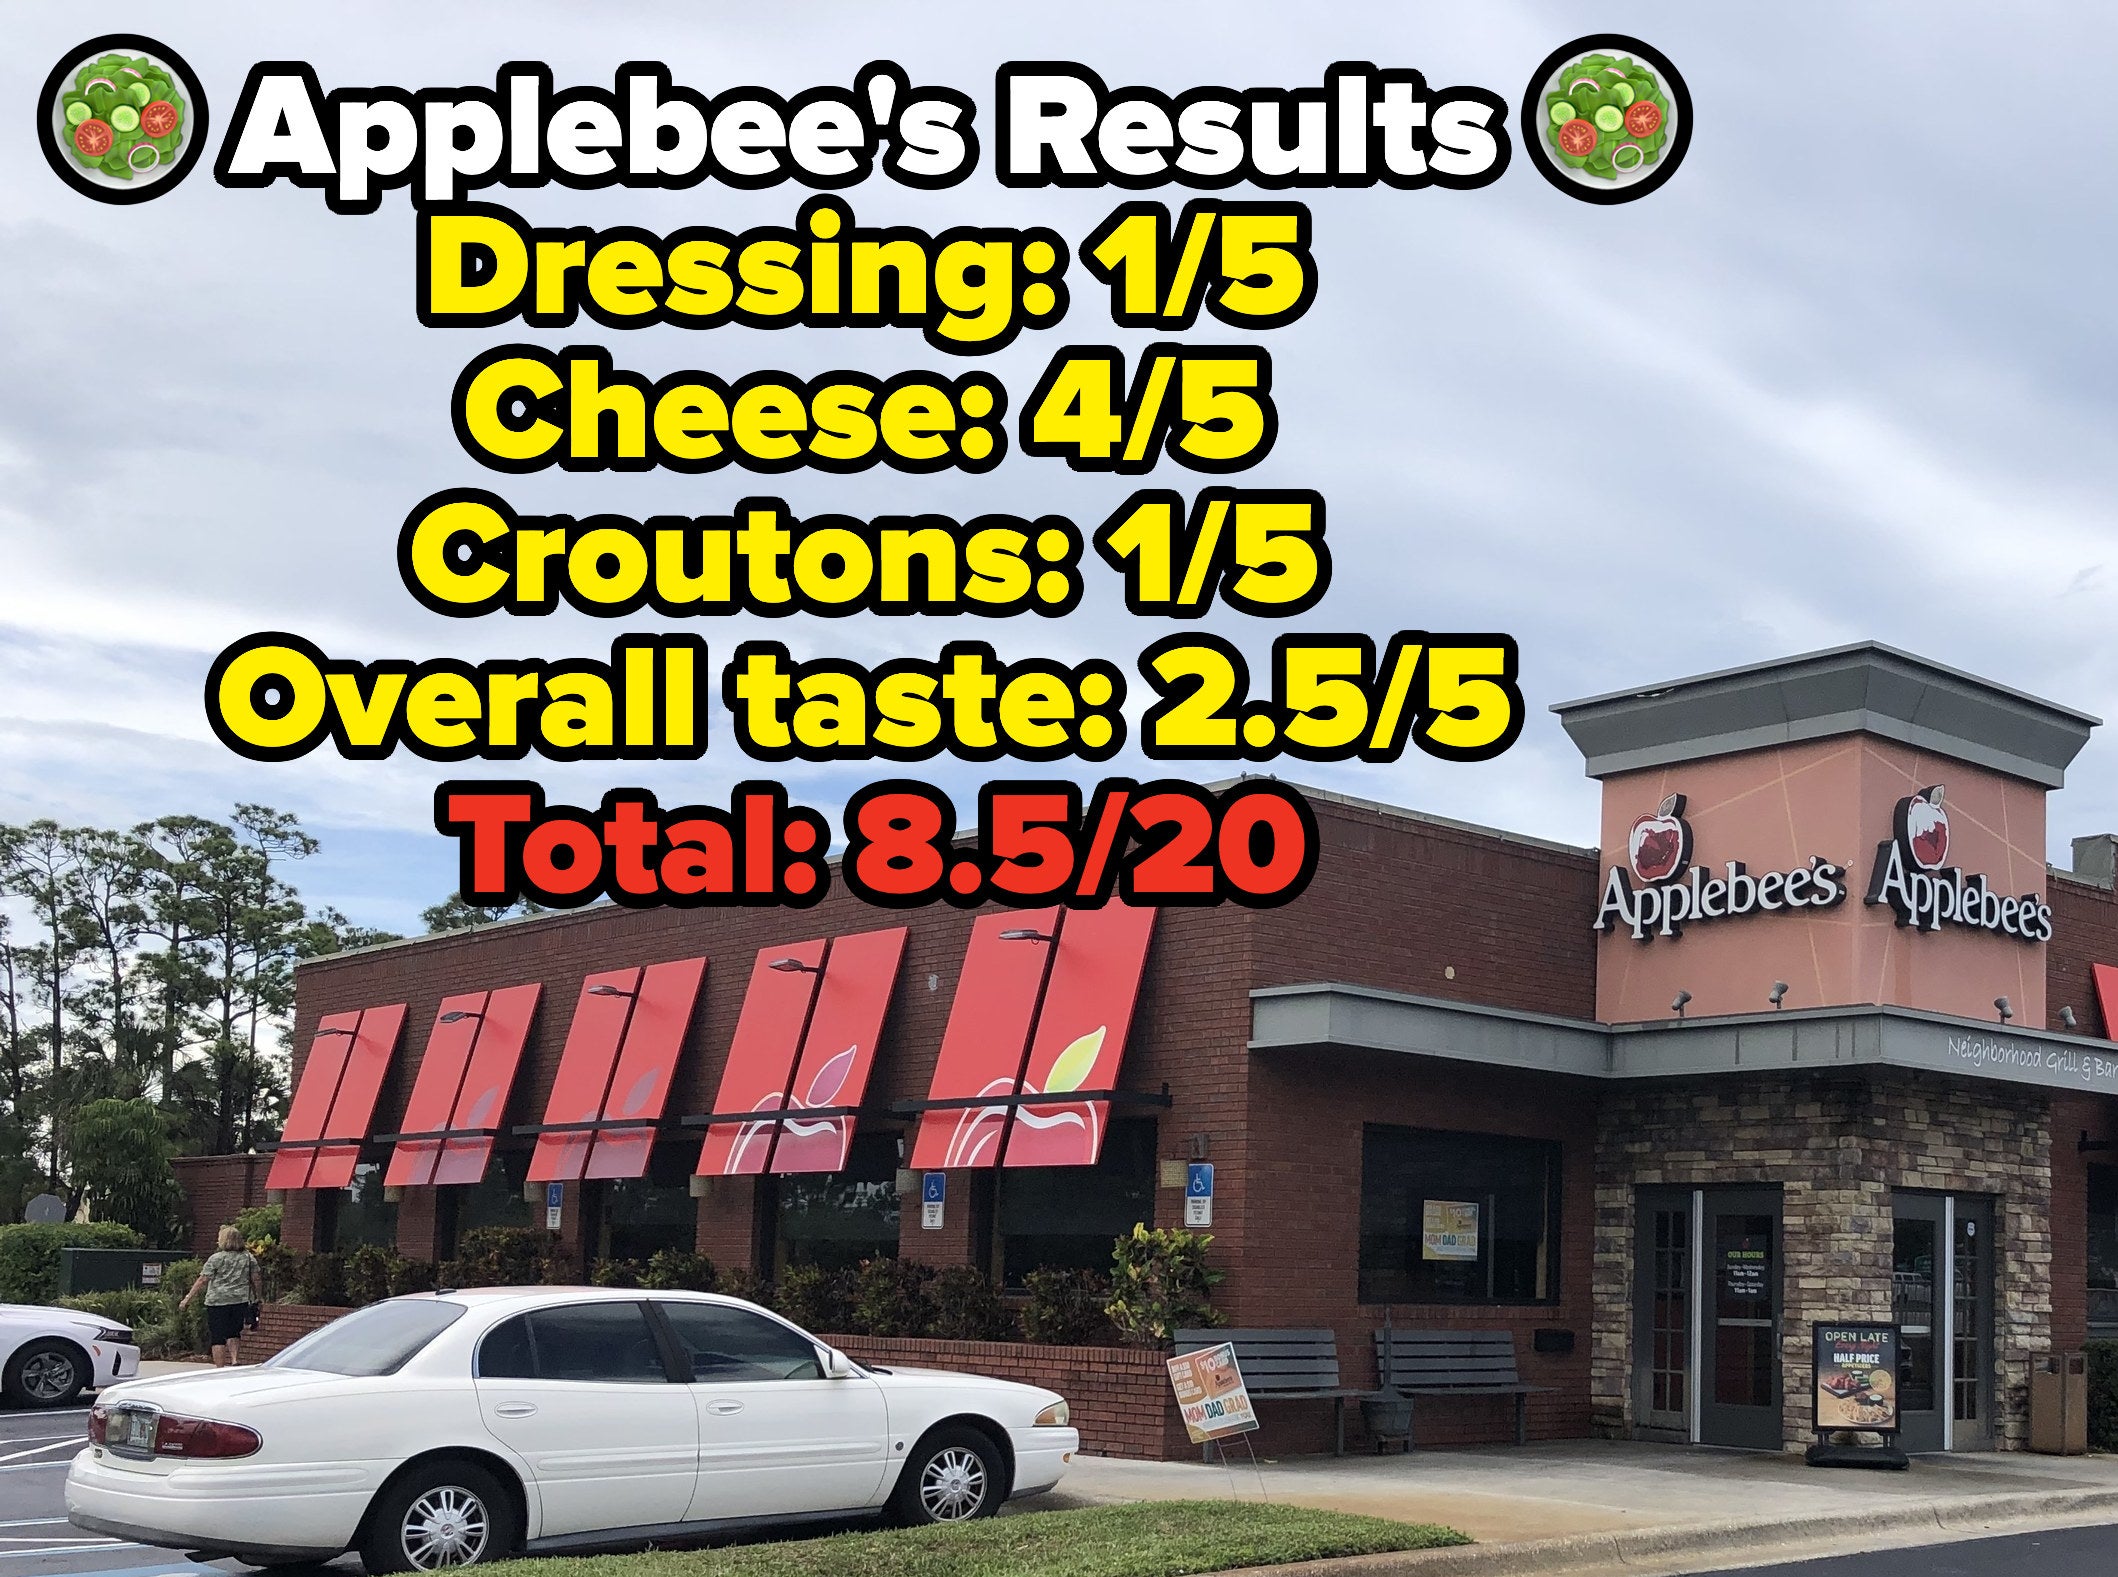 Photo of Applebee&#x27;s with text that says &quot;Applebee&#x27;s Results: dressing 1/5, cheese 4/5, croutons 1/5, overall taste 2.5/5, total 8.5/20&quot;